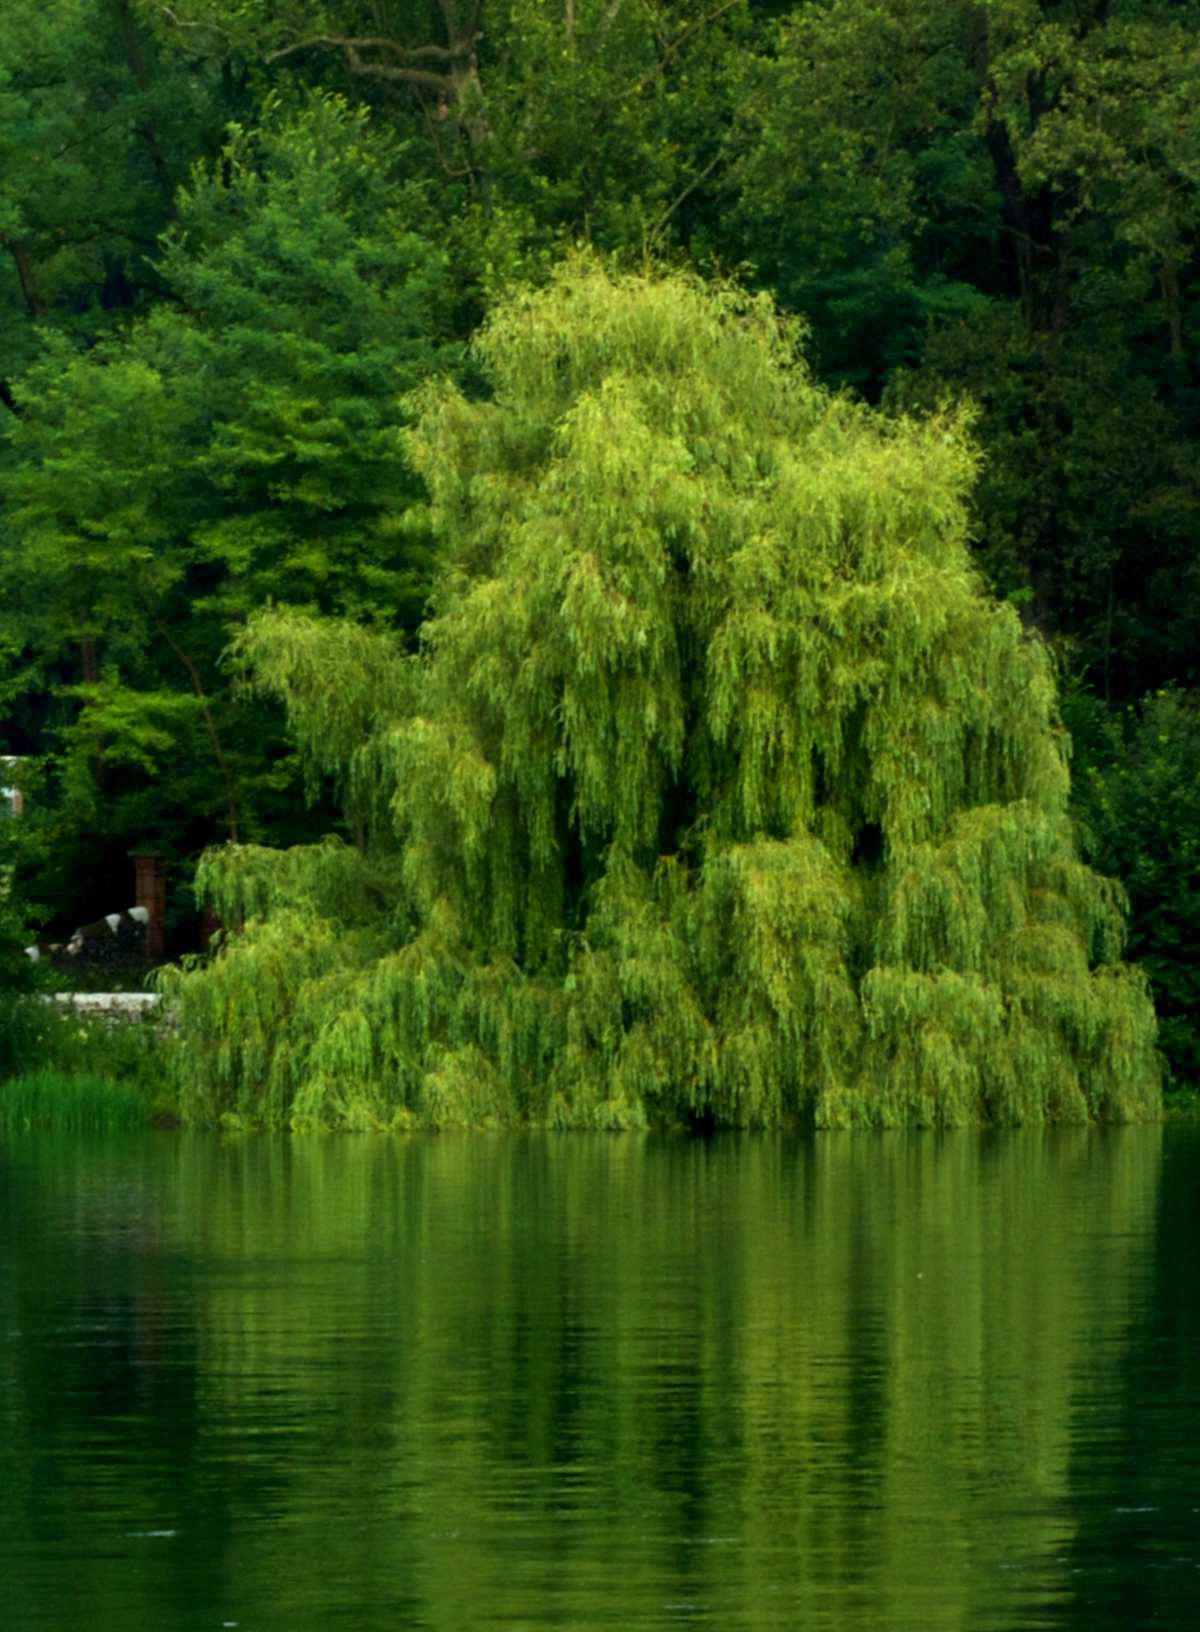 Large willow weeping along the side of a lake